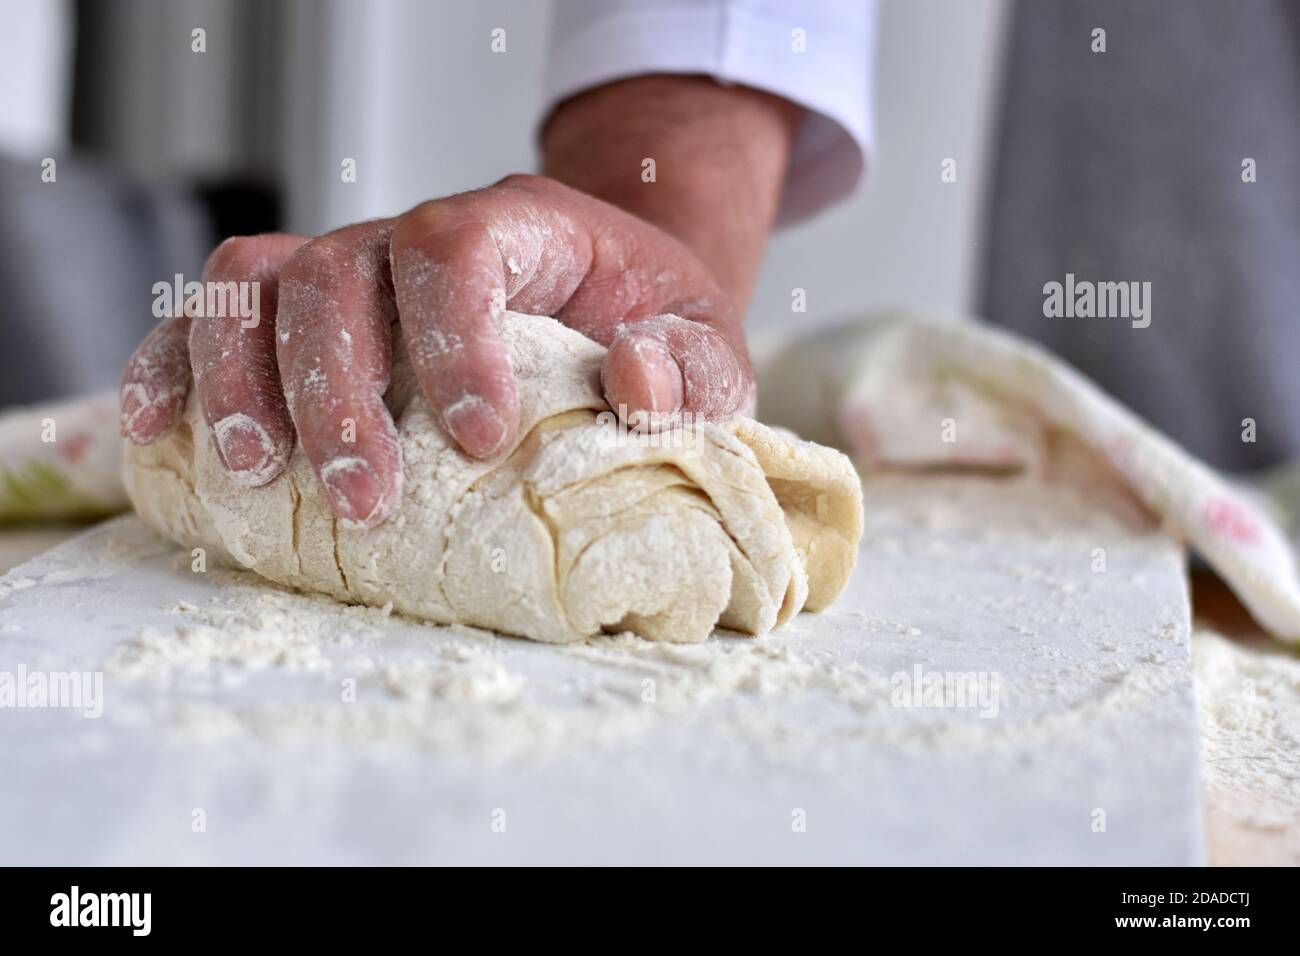 https://c8.alamy.com/comp/2DADCTJ/bread-making-process-closeup-of-man-hands-kneading-dough-baker-cooking-pastry-culinary-courses-and-food-preparation-2DADCTJ.jpg